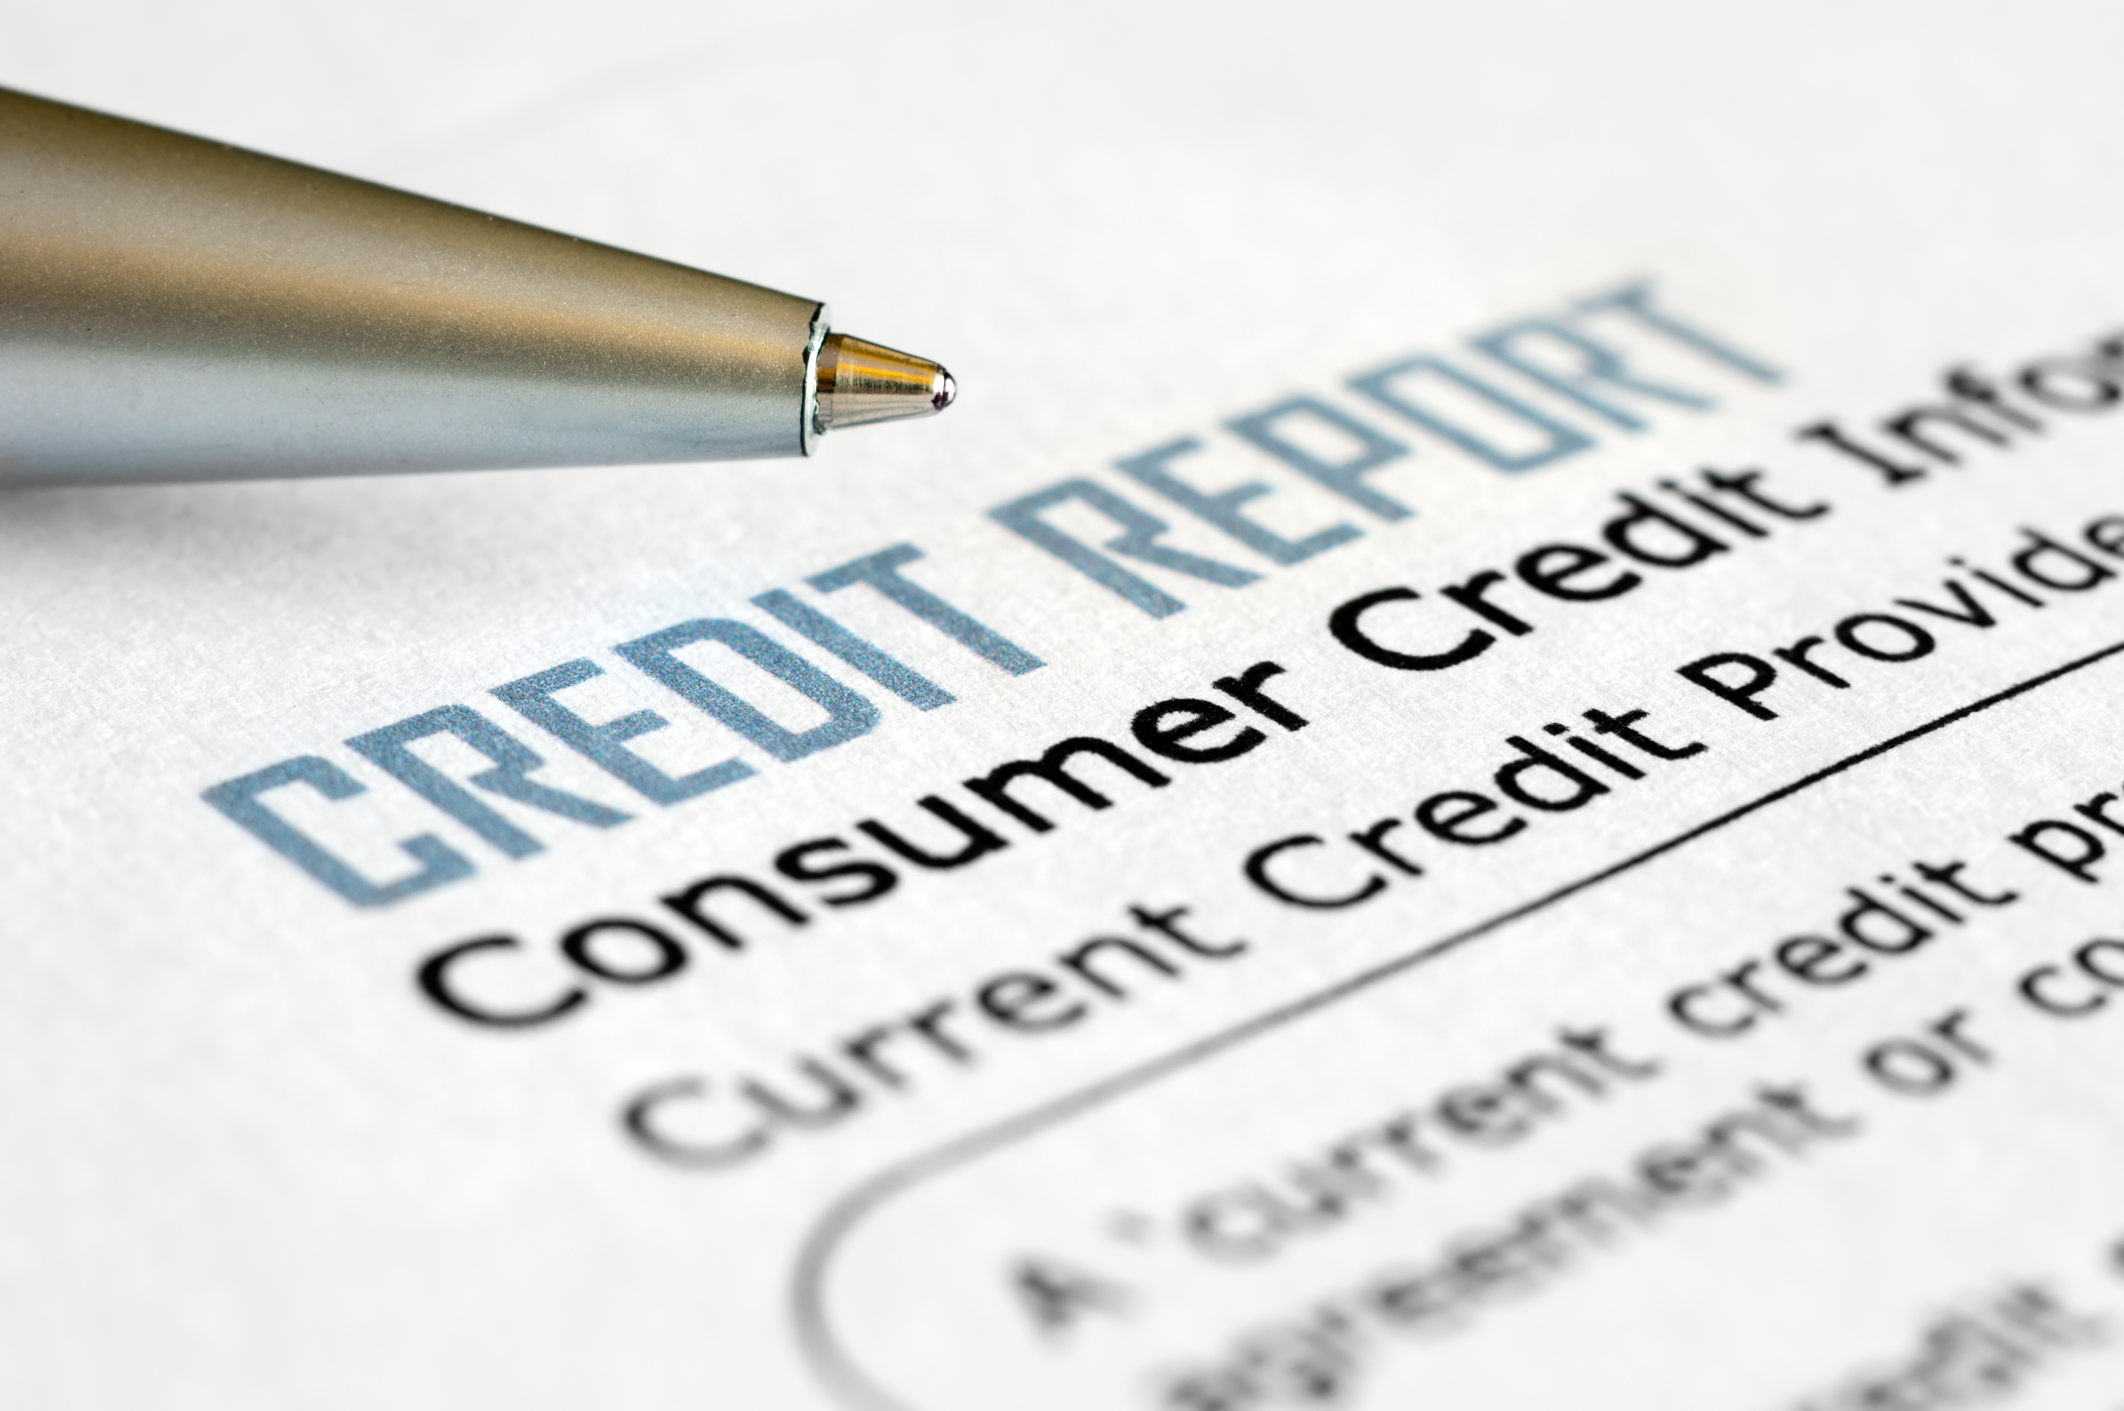 TransUnion to Allow Crypto Lenders to Check Credit Reports: Report